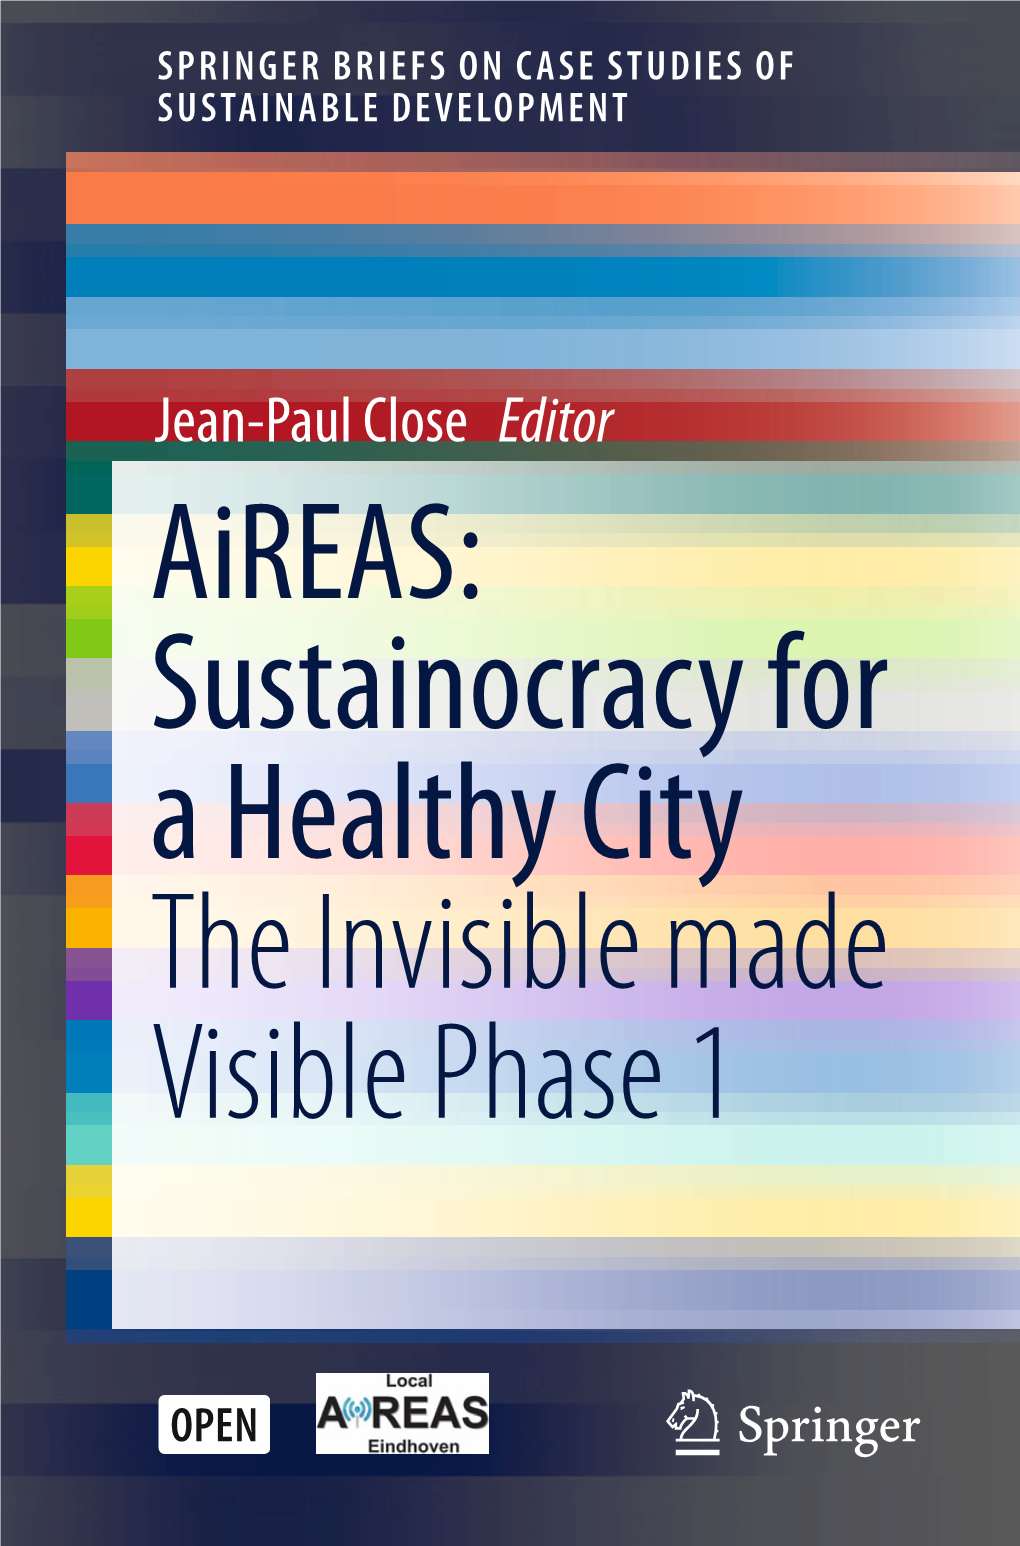 Sustainocracy for a Healthy City the Invisible Made Visible Phase 1 Springerbriefs on Case Studies of Sustainable Development